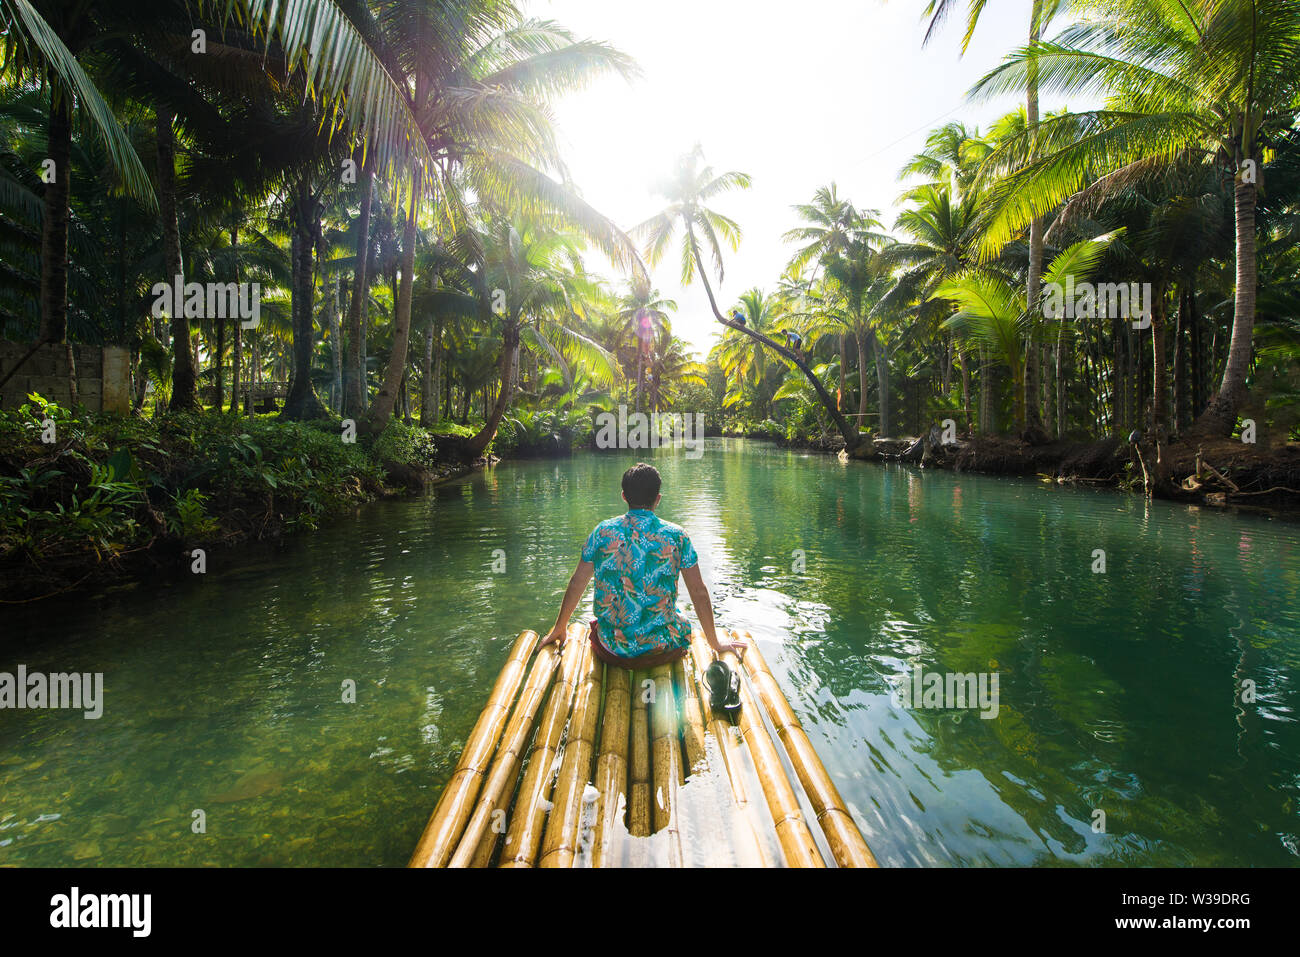 Famous instagrammed leaning palm tree at Maasin River in Siargao, Philippines - People having fun swinging on a coconut tree in the jungle Stock Photo